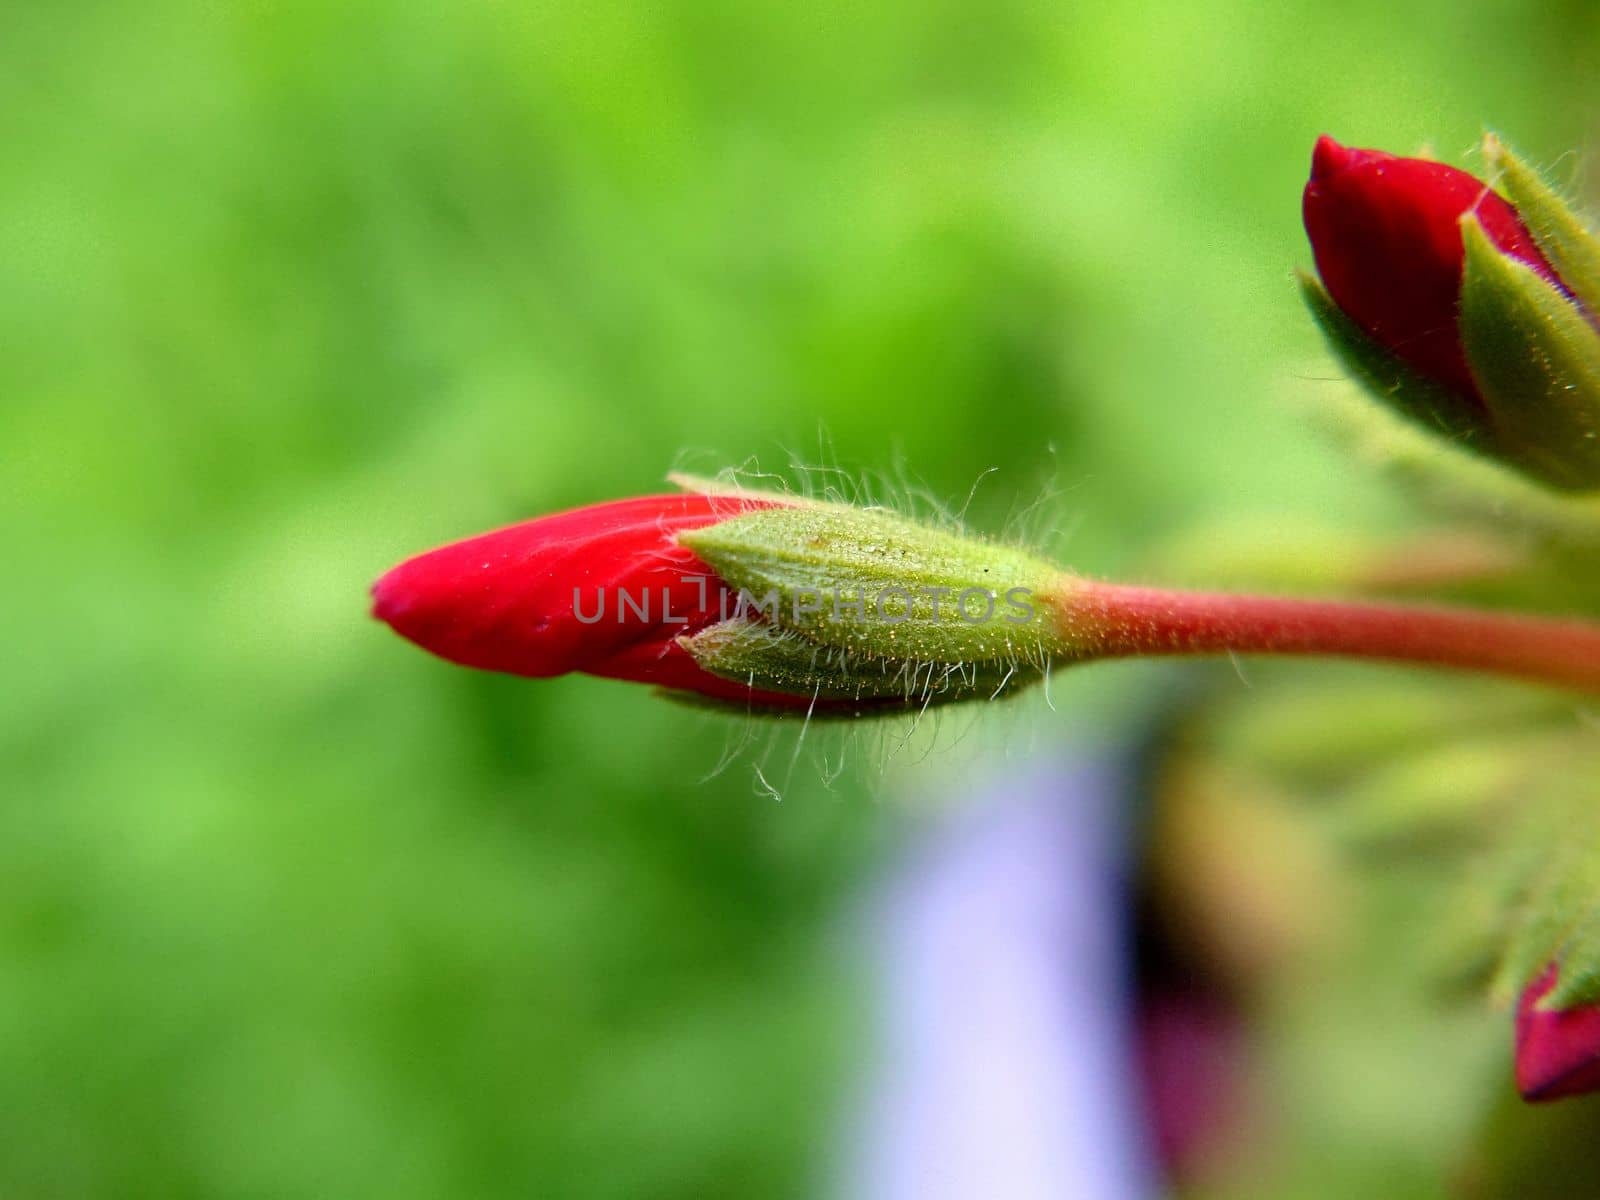 Pointed buds of a red flower on a blurry background on a summer day by Mastak80